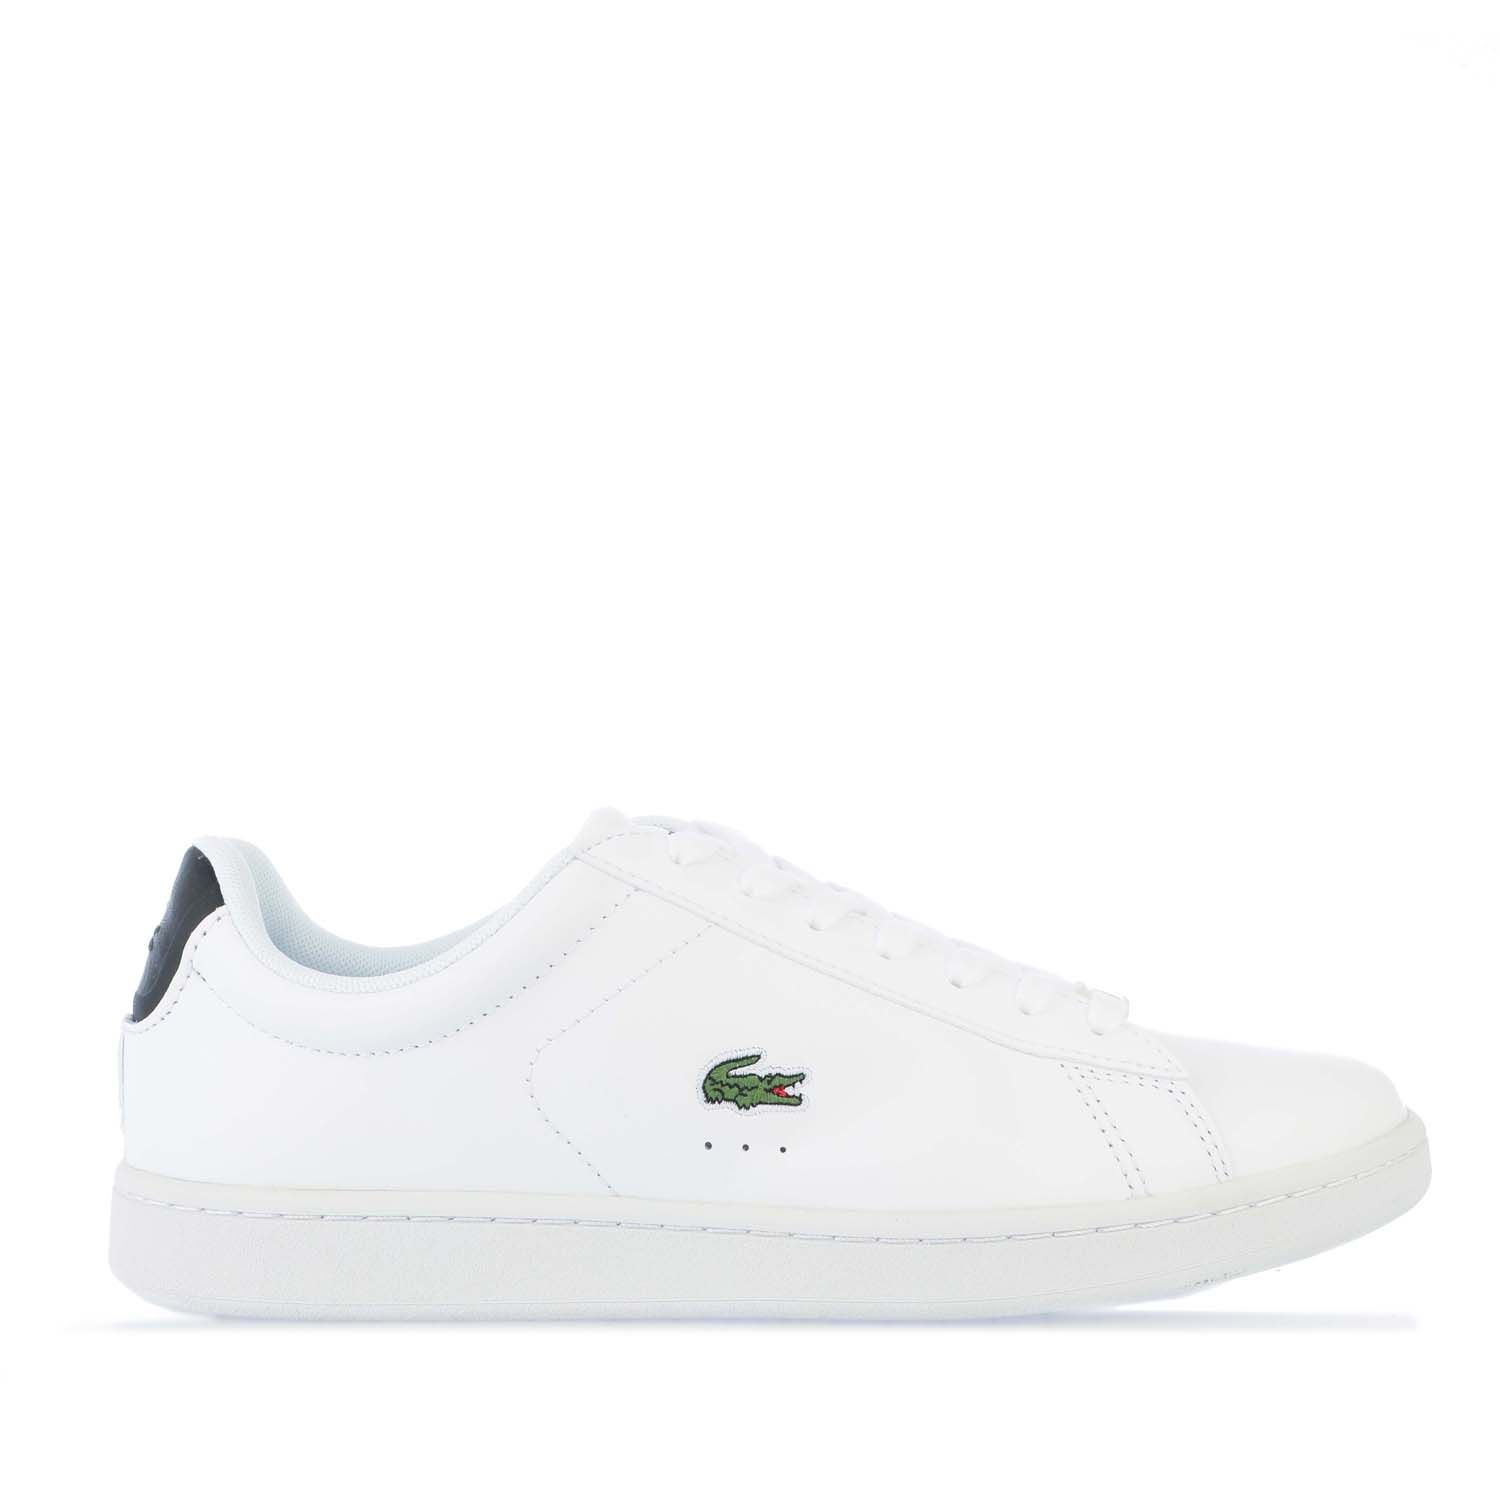 Lacoste Carnaby Evo 119 7 Junior White Trainers 